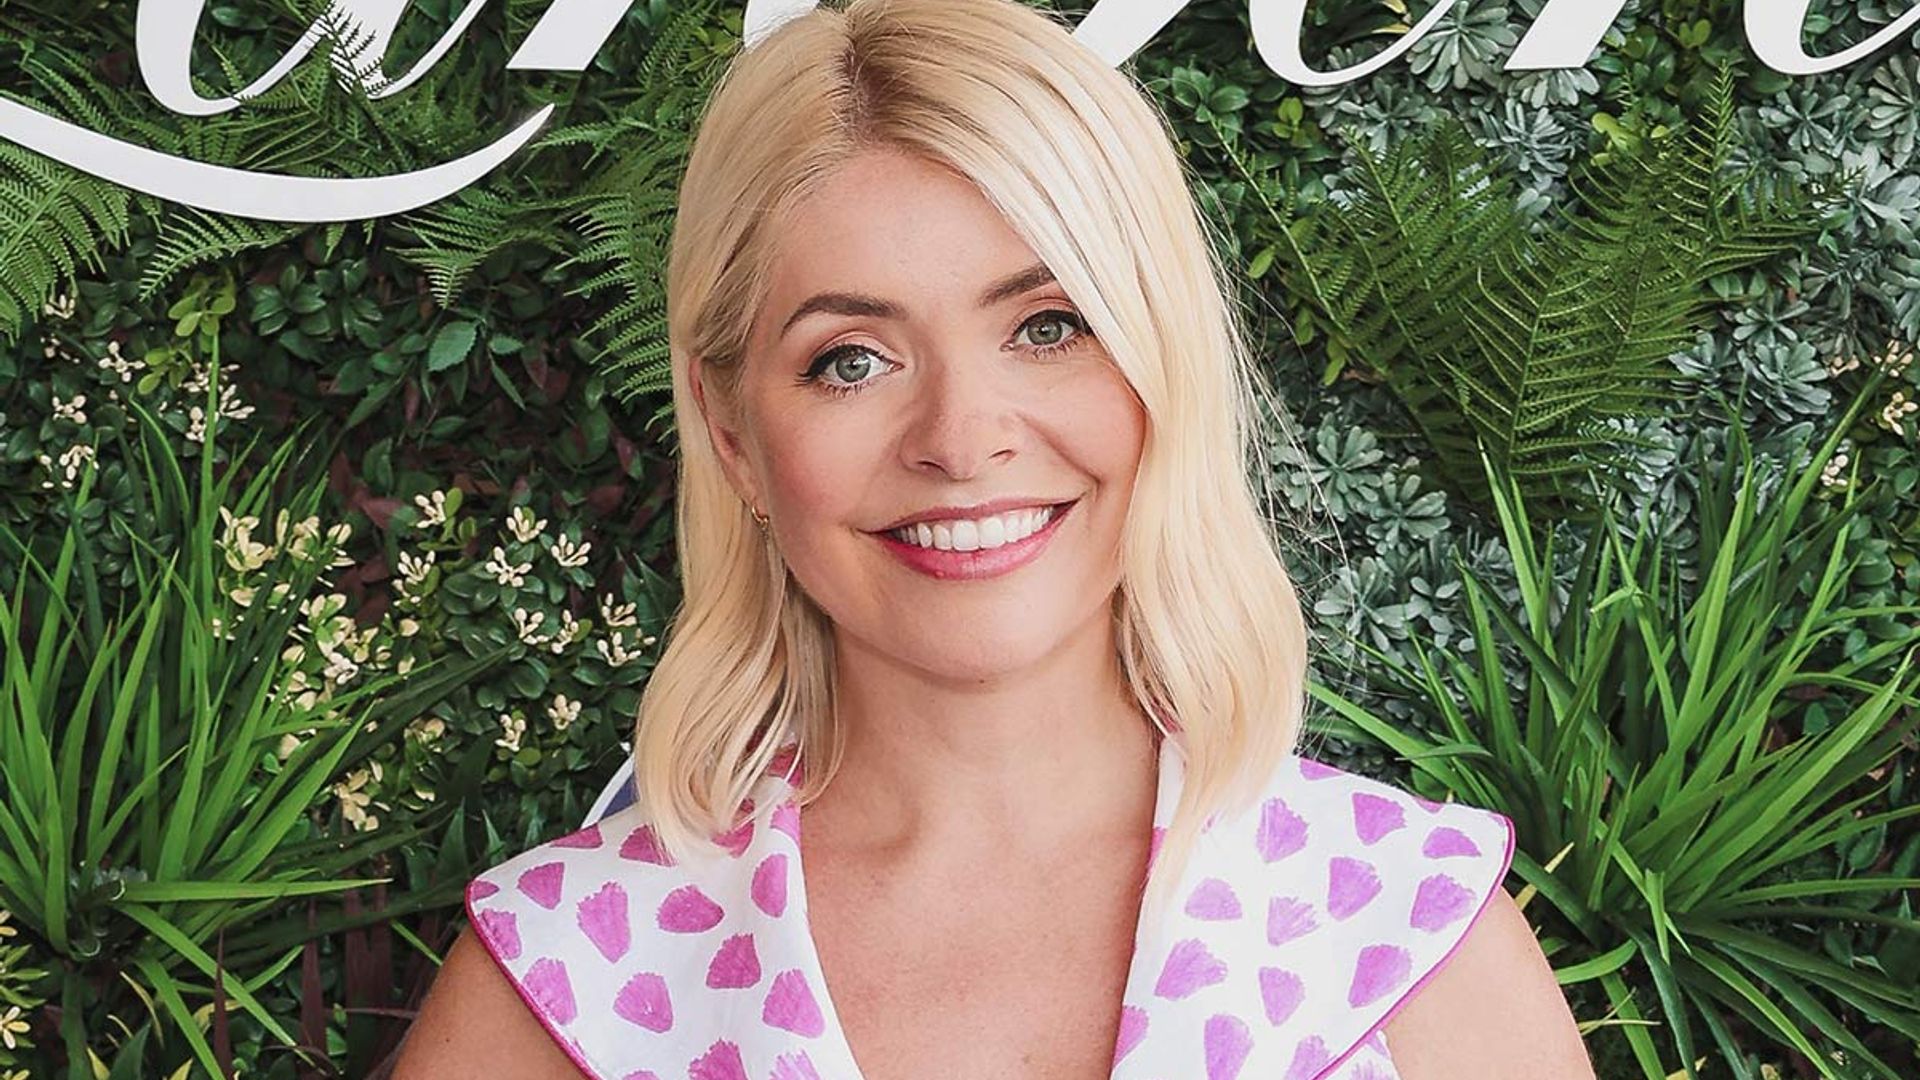 Holly Willoughby has a movie star moment at Wimbledon in Marilyn dress